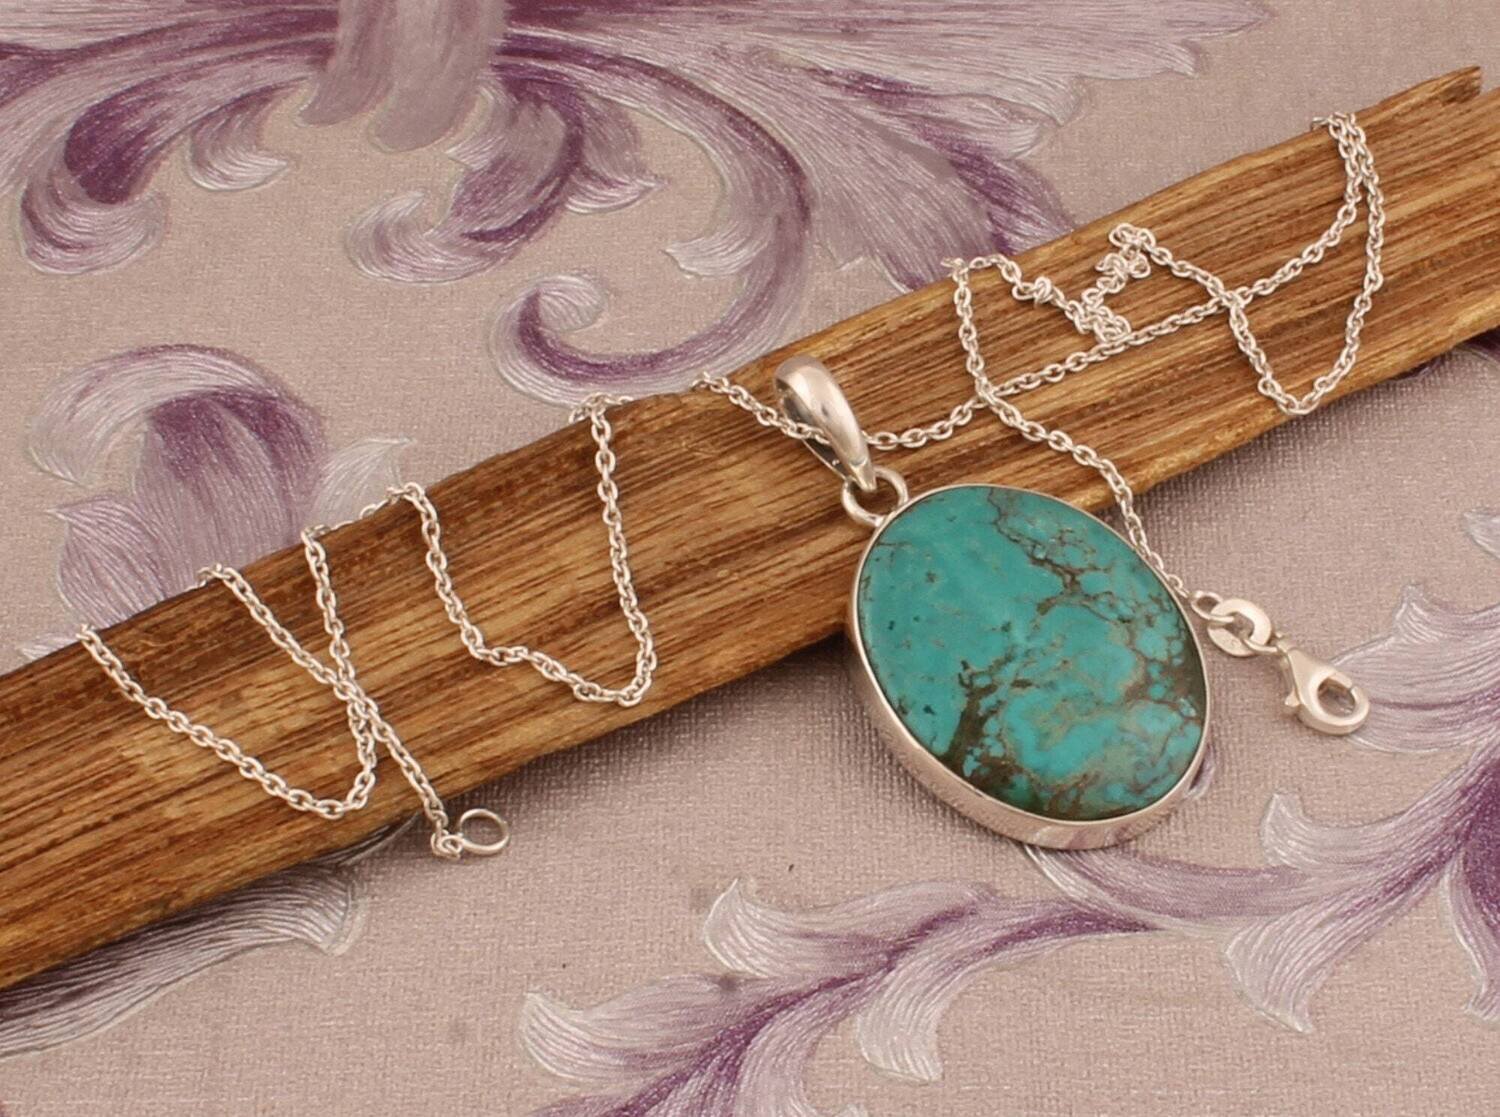 925 Sterling Silver Tibetan Turquoise Pendant Necklace, Handmade Oval Gemstone Silver Necklace, Women Jewelry Gift Idea, Etsy Cyber 2021